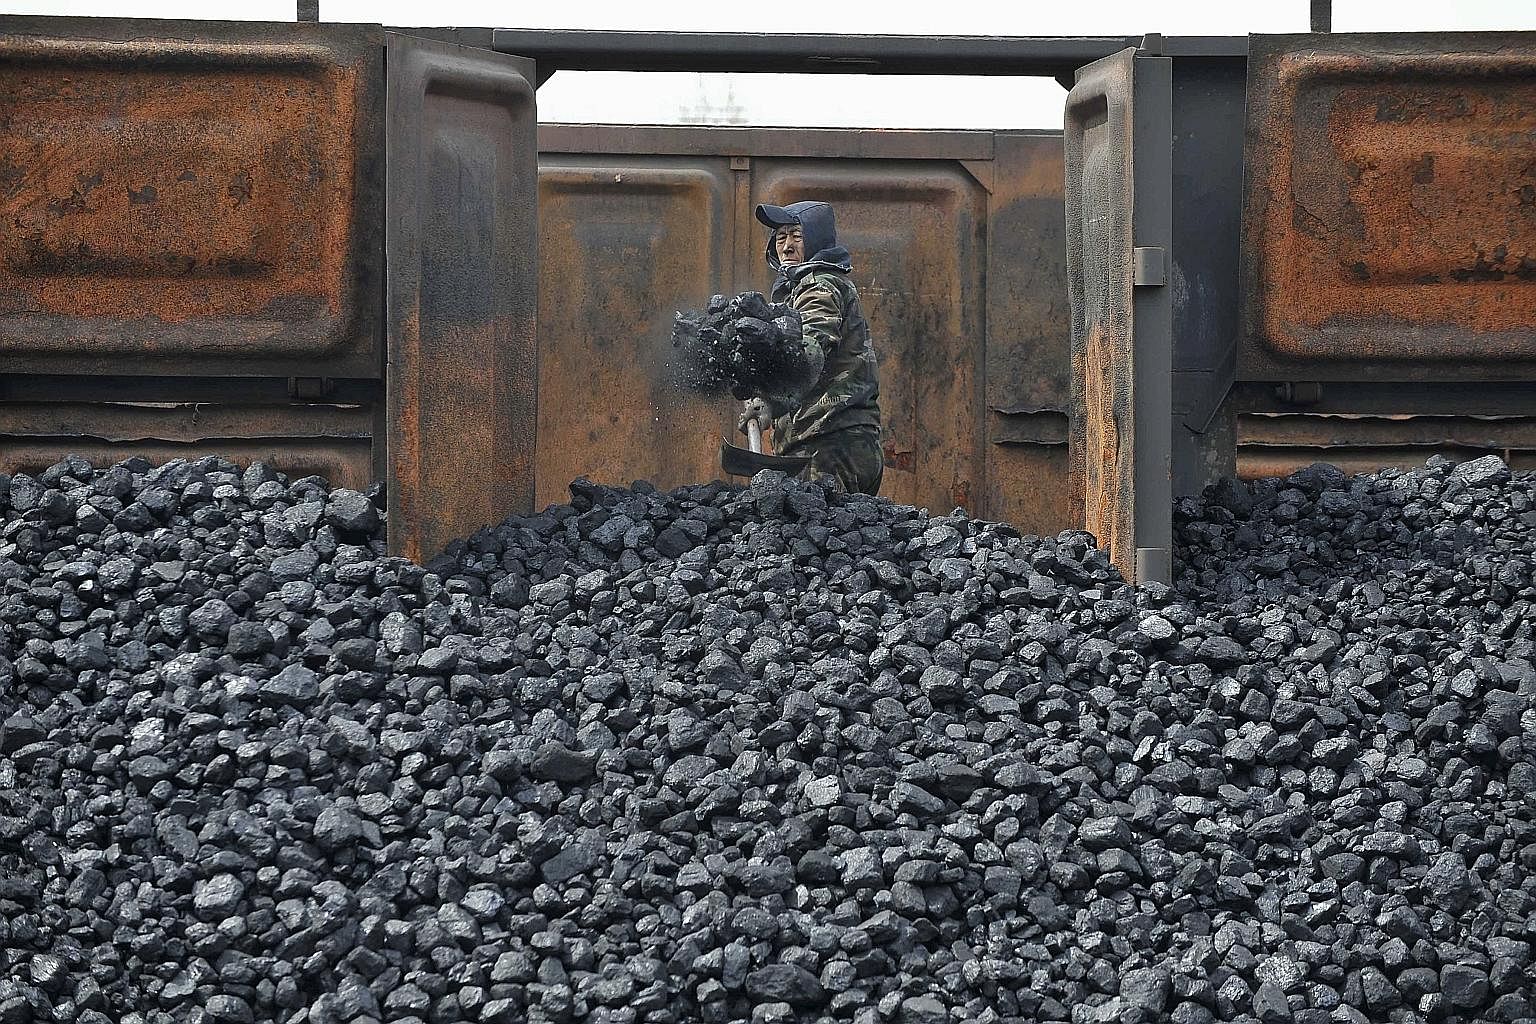 A worker unloading coal at a storage site along a railway station in Shenyang, Liaoning province, in China. Faced with choking air pollution, China is starting to shift away from coal-fired power plants and is also forcing dirty industries to clean u